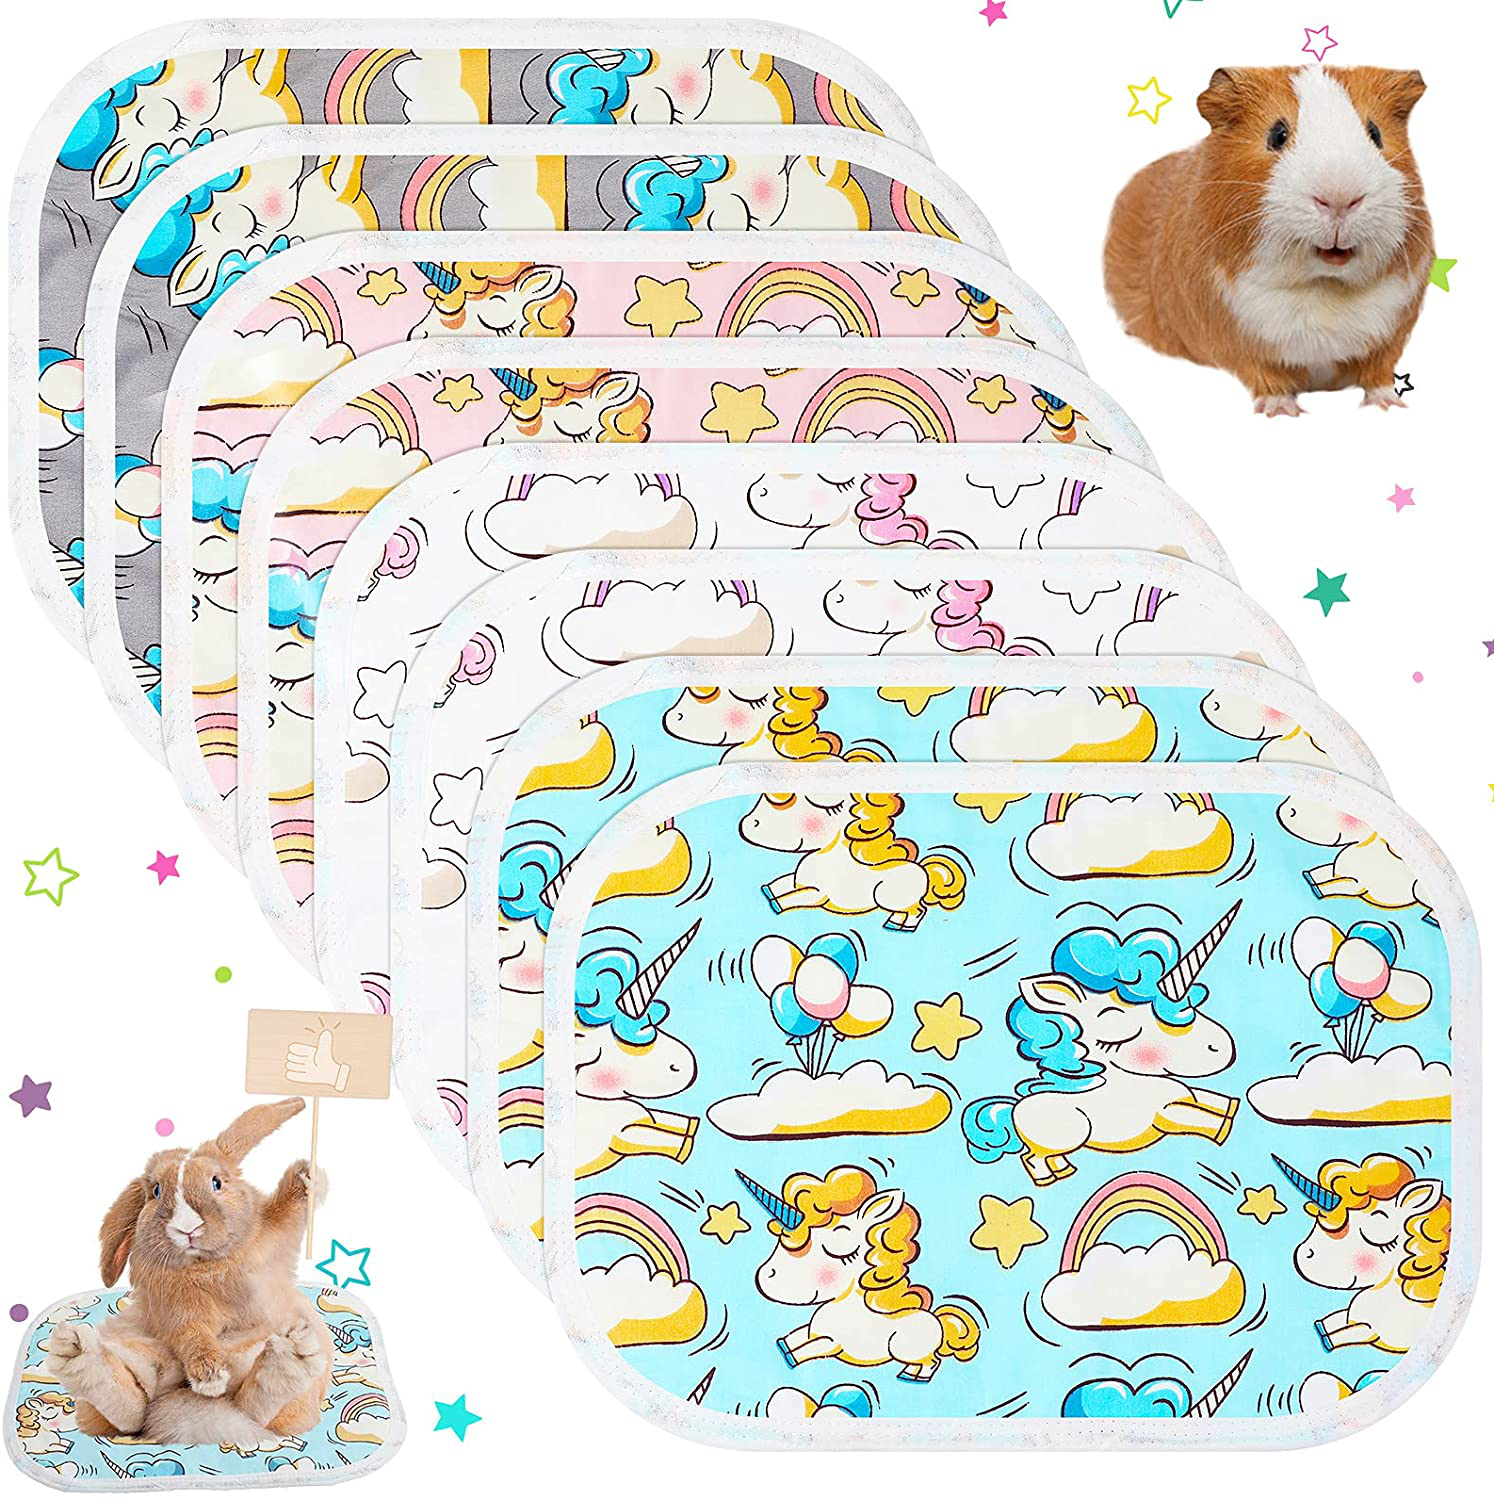 Jetec 8 Pieces Guinea Pig Cage Liner Guinea Pig Bedding Washable Pee Pad Anti-Slip and Highly Absorbent Guinea Pig Bedding Waterproof Pet Training Pad for Small Animal Supplies